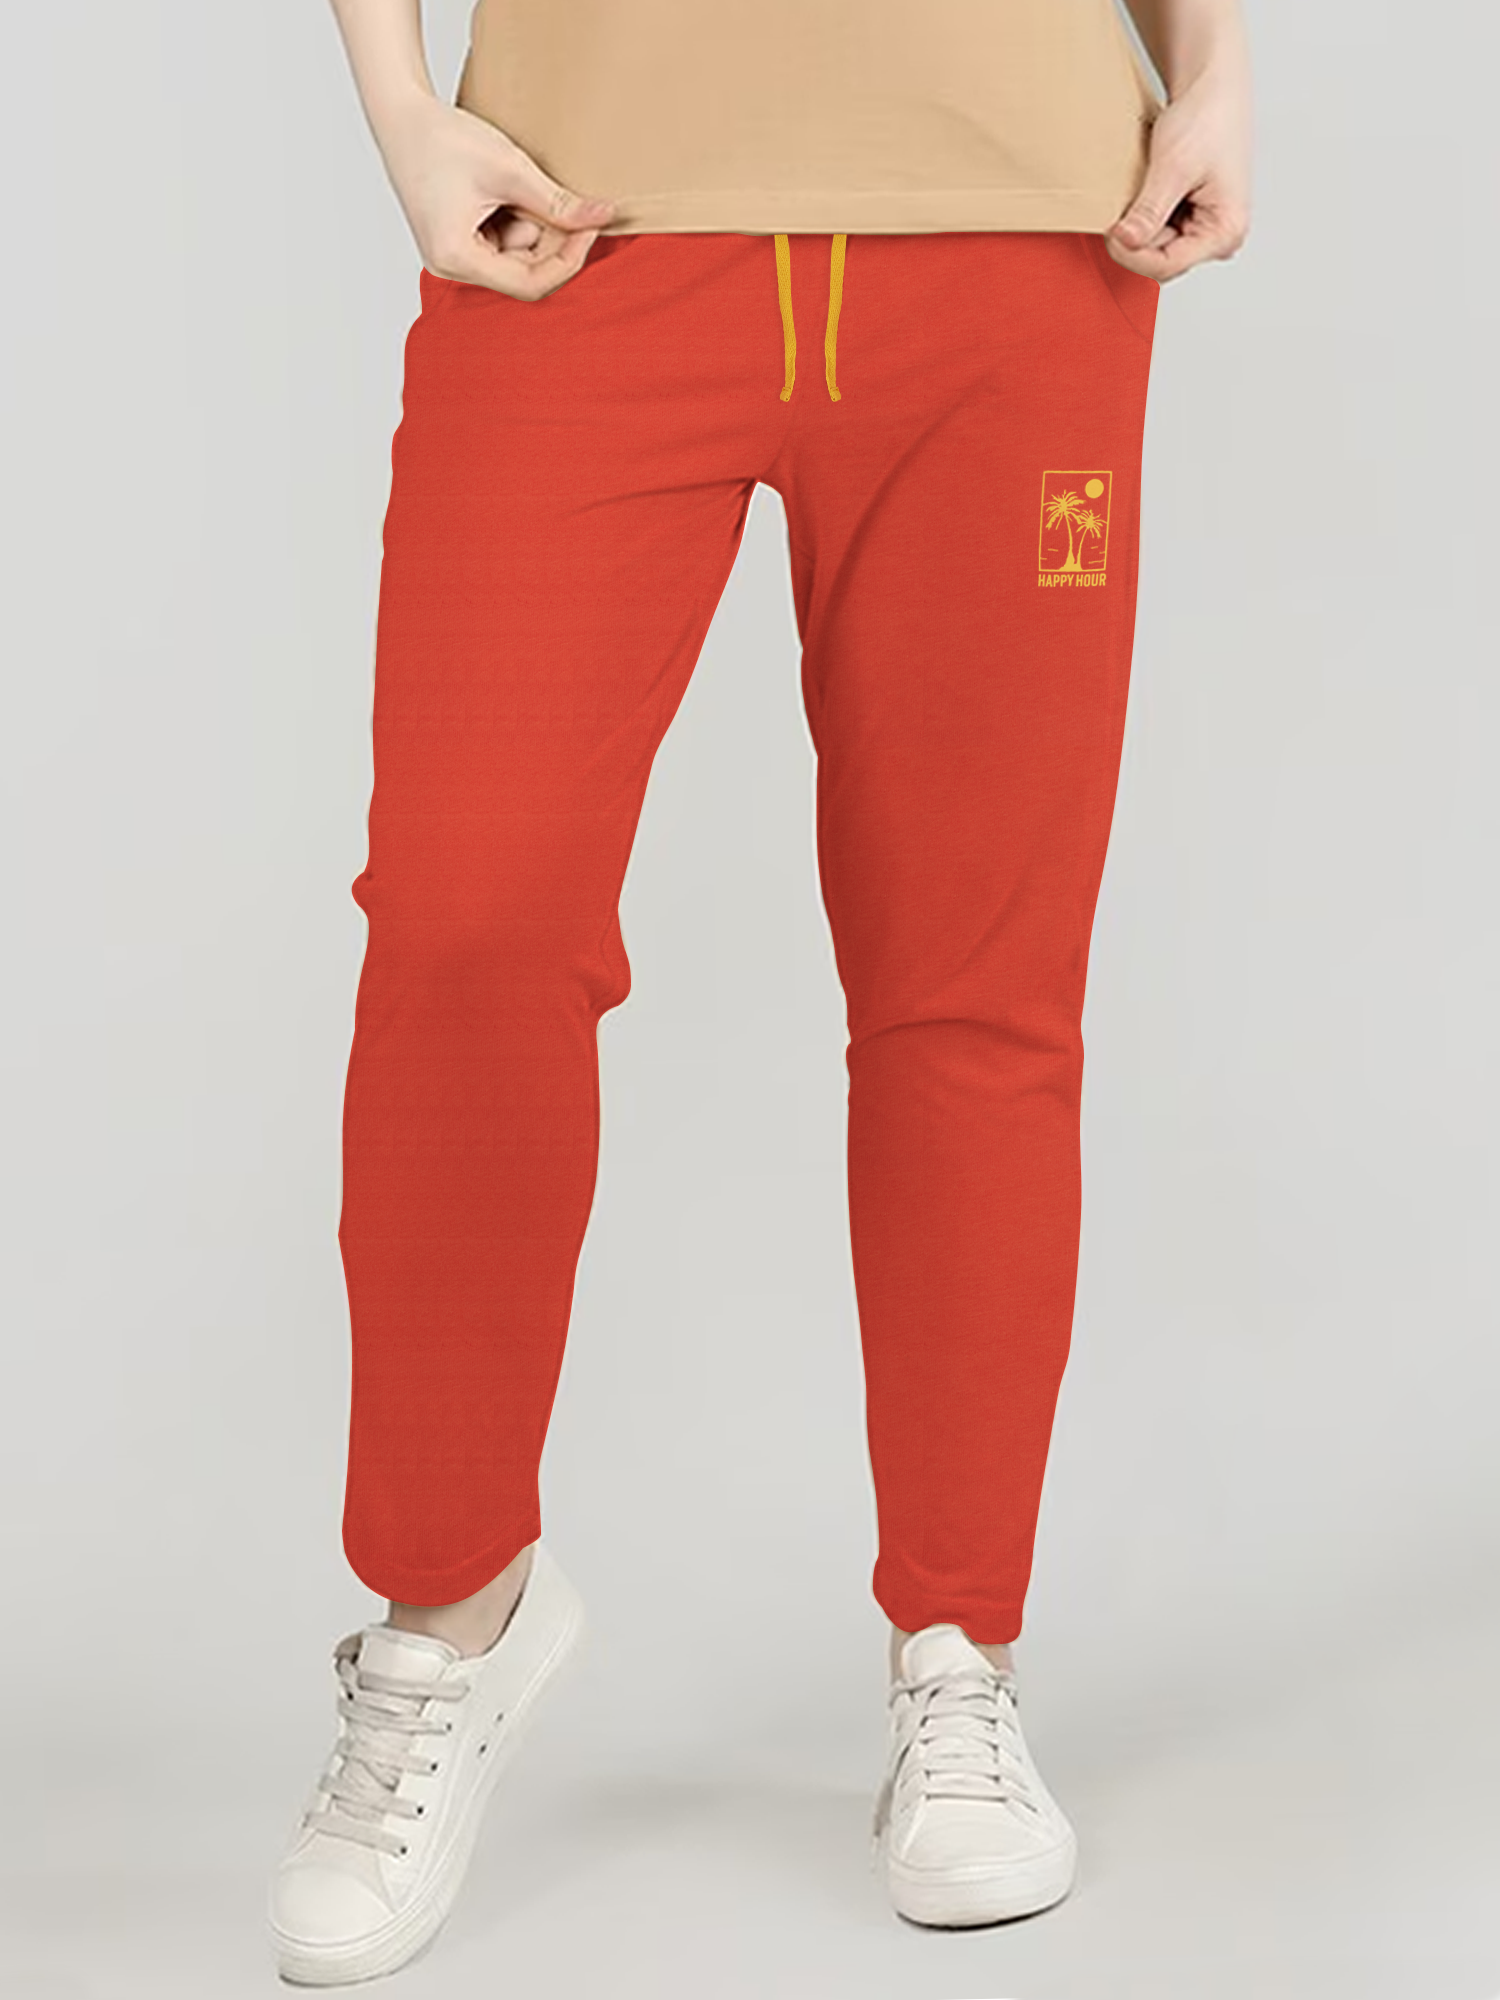 WOMEN'S RED HAPPY HOUR JOGGER